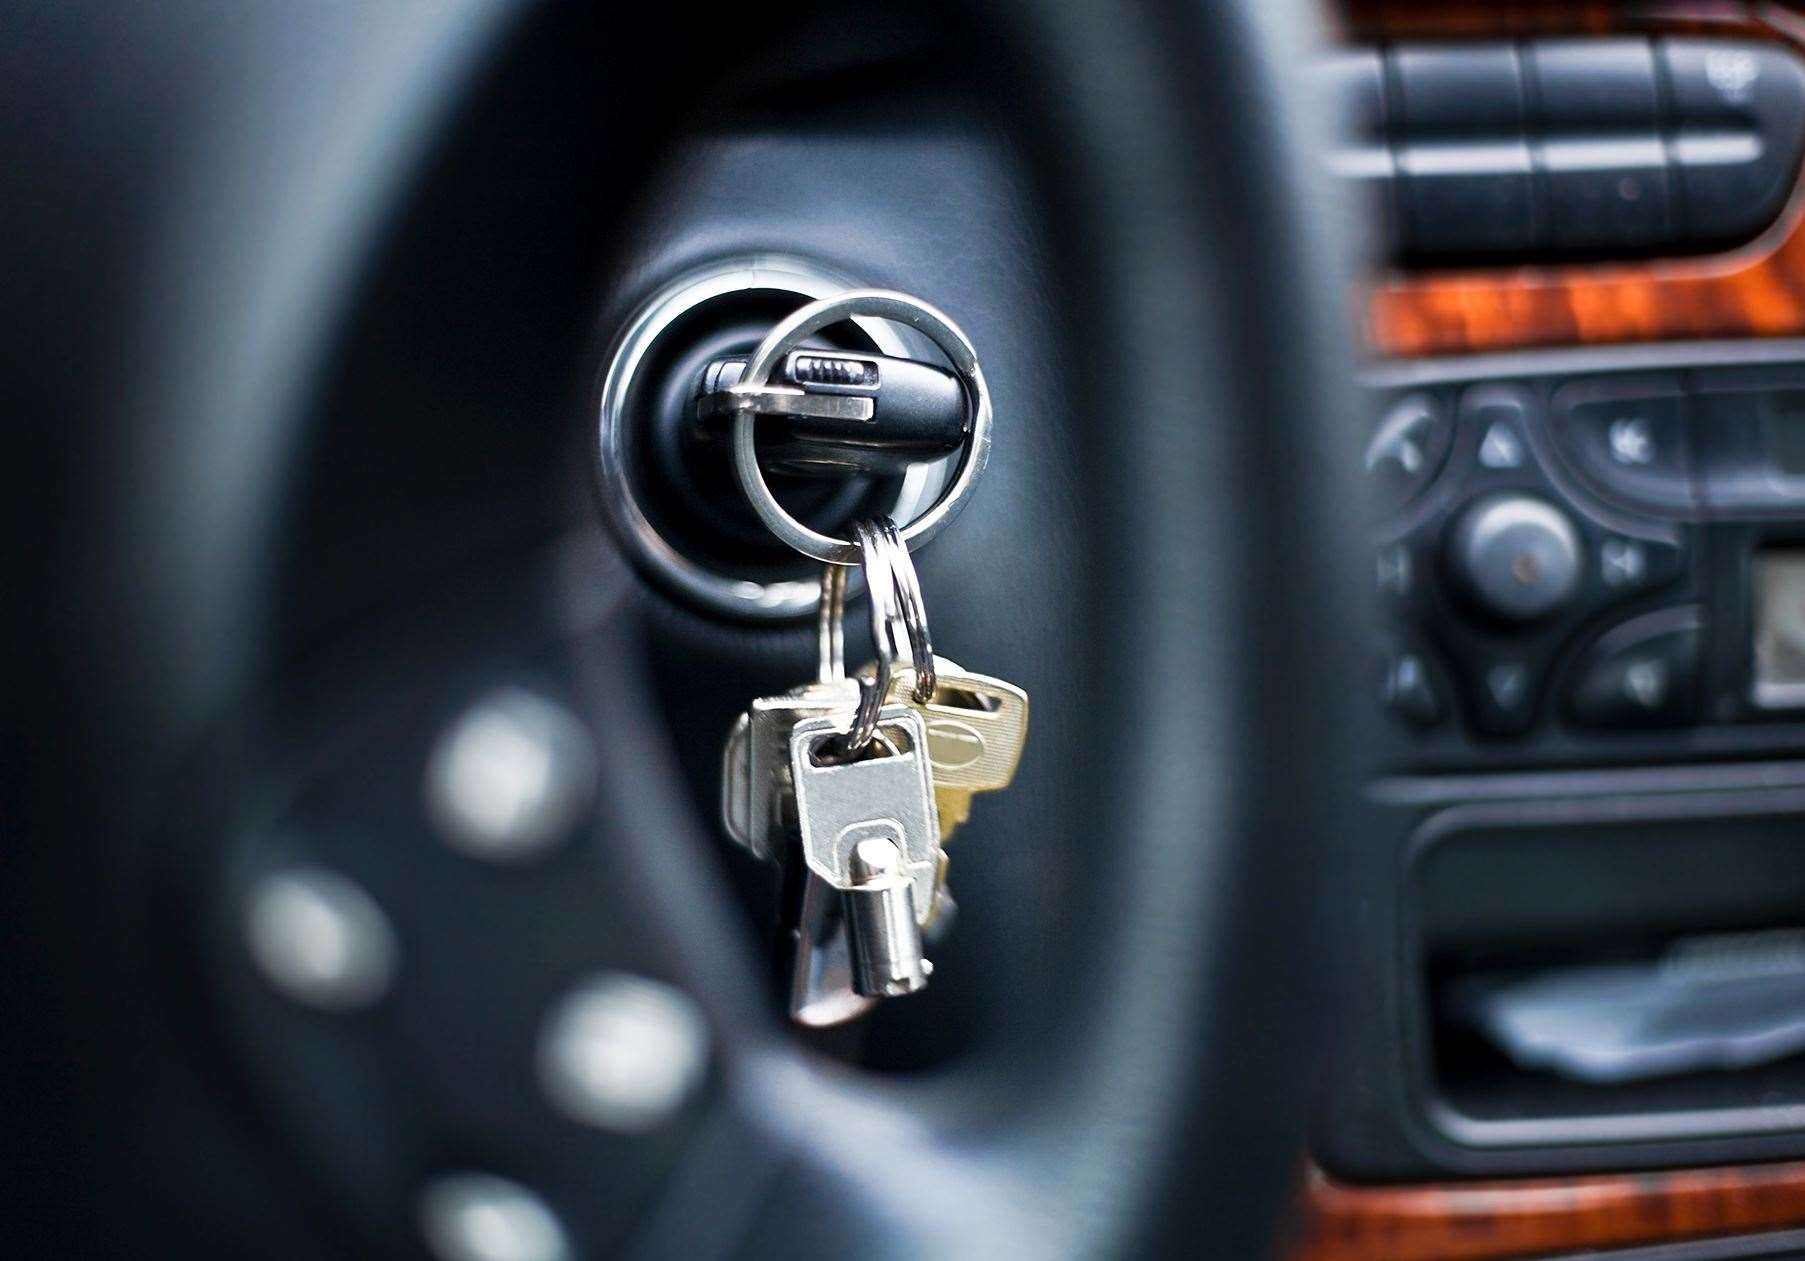 The 20-year-old was found asleep in his car with the keys in the ignition. Stock picture